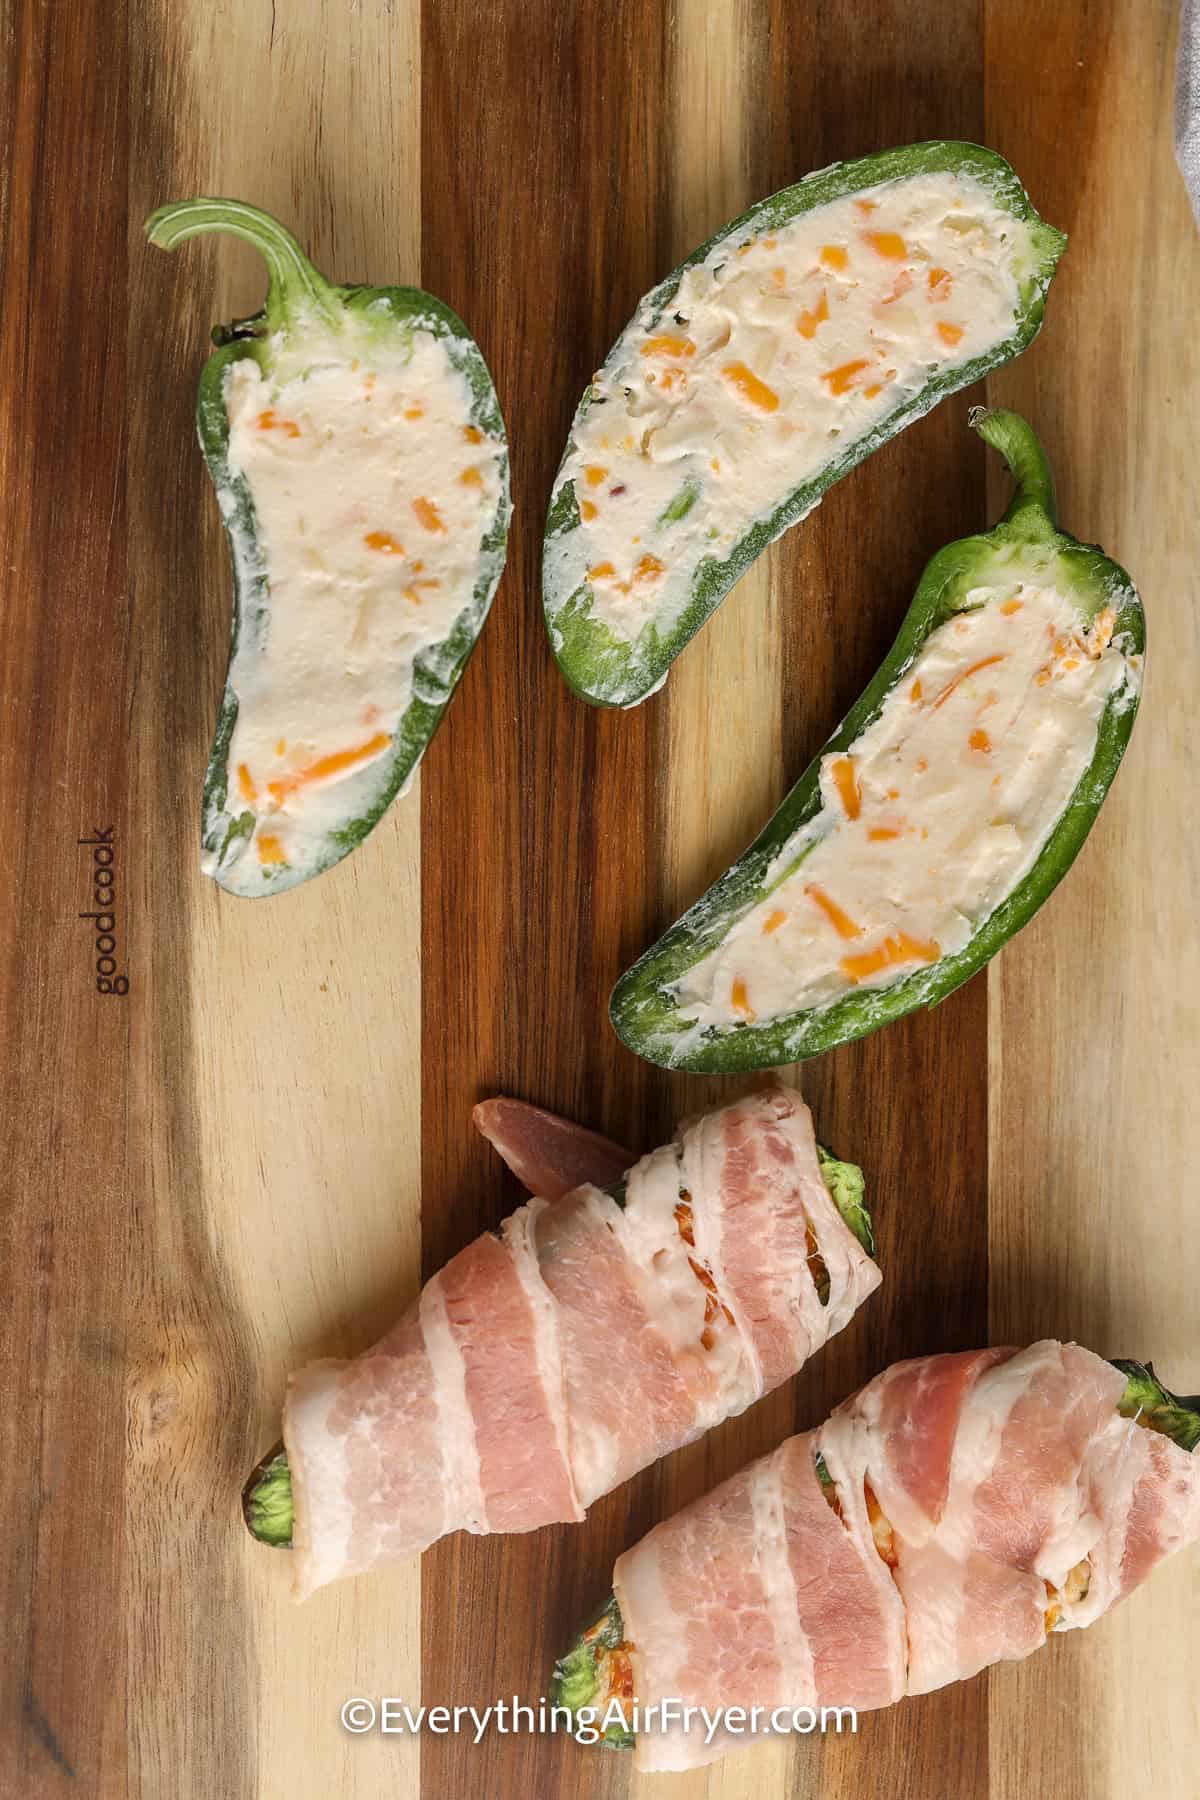 process of stuffing and wrapping jalapenos